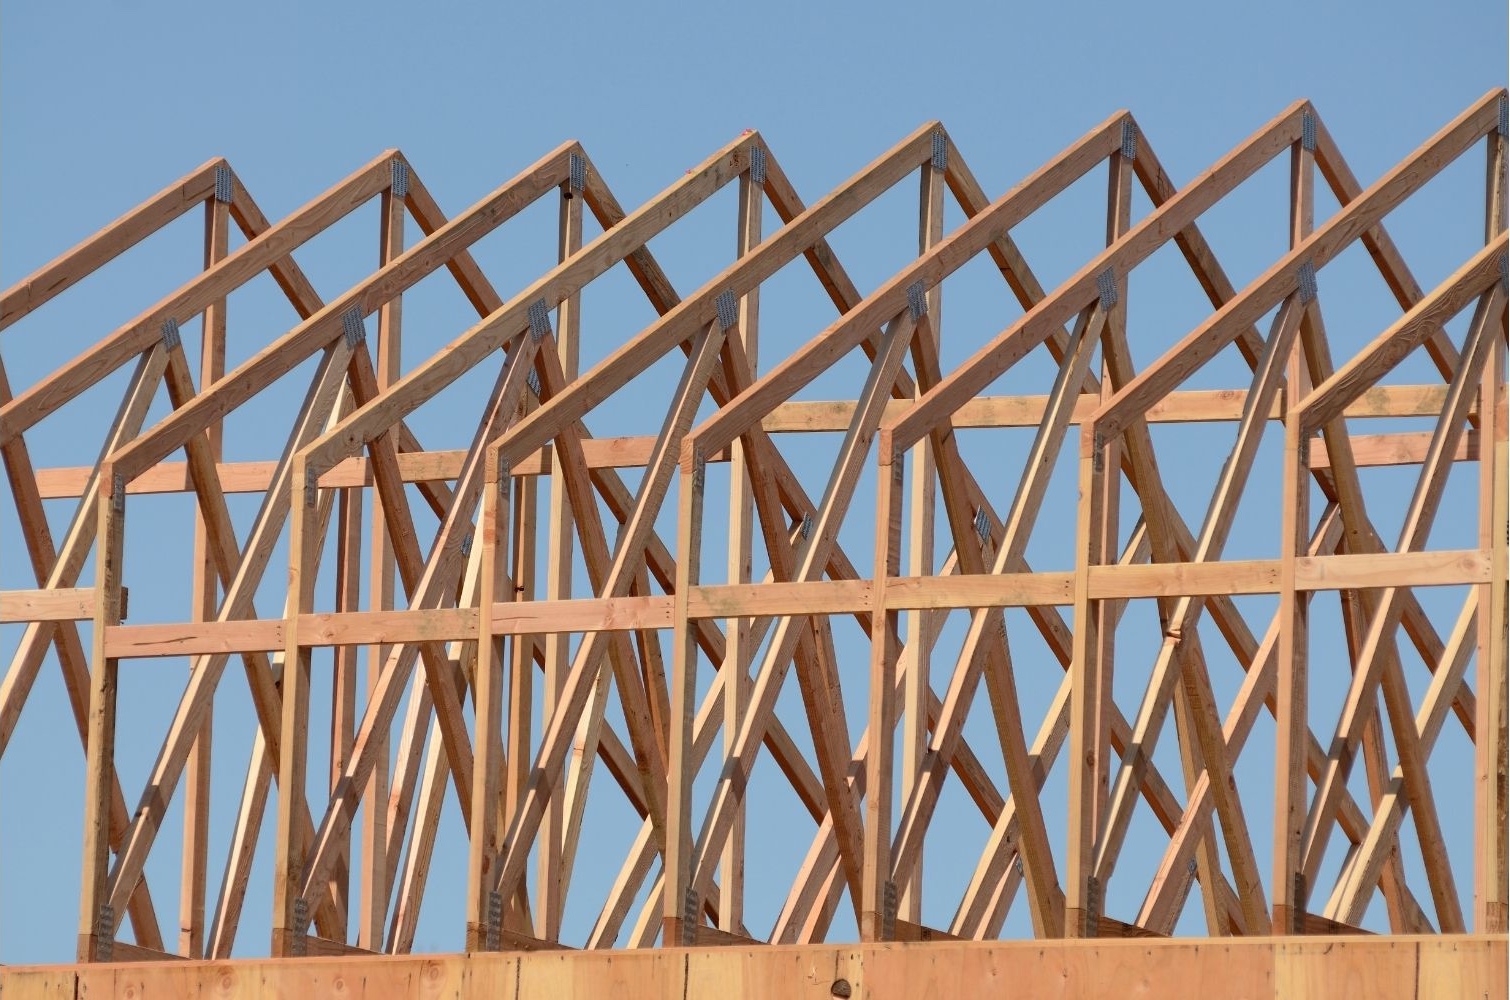 The new facility will make floor and roof trusses among other engineered materials for the construction and agricultural sectors. (Photo/Canva)